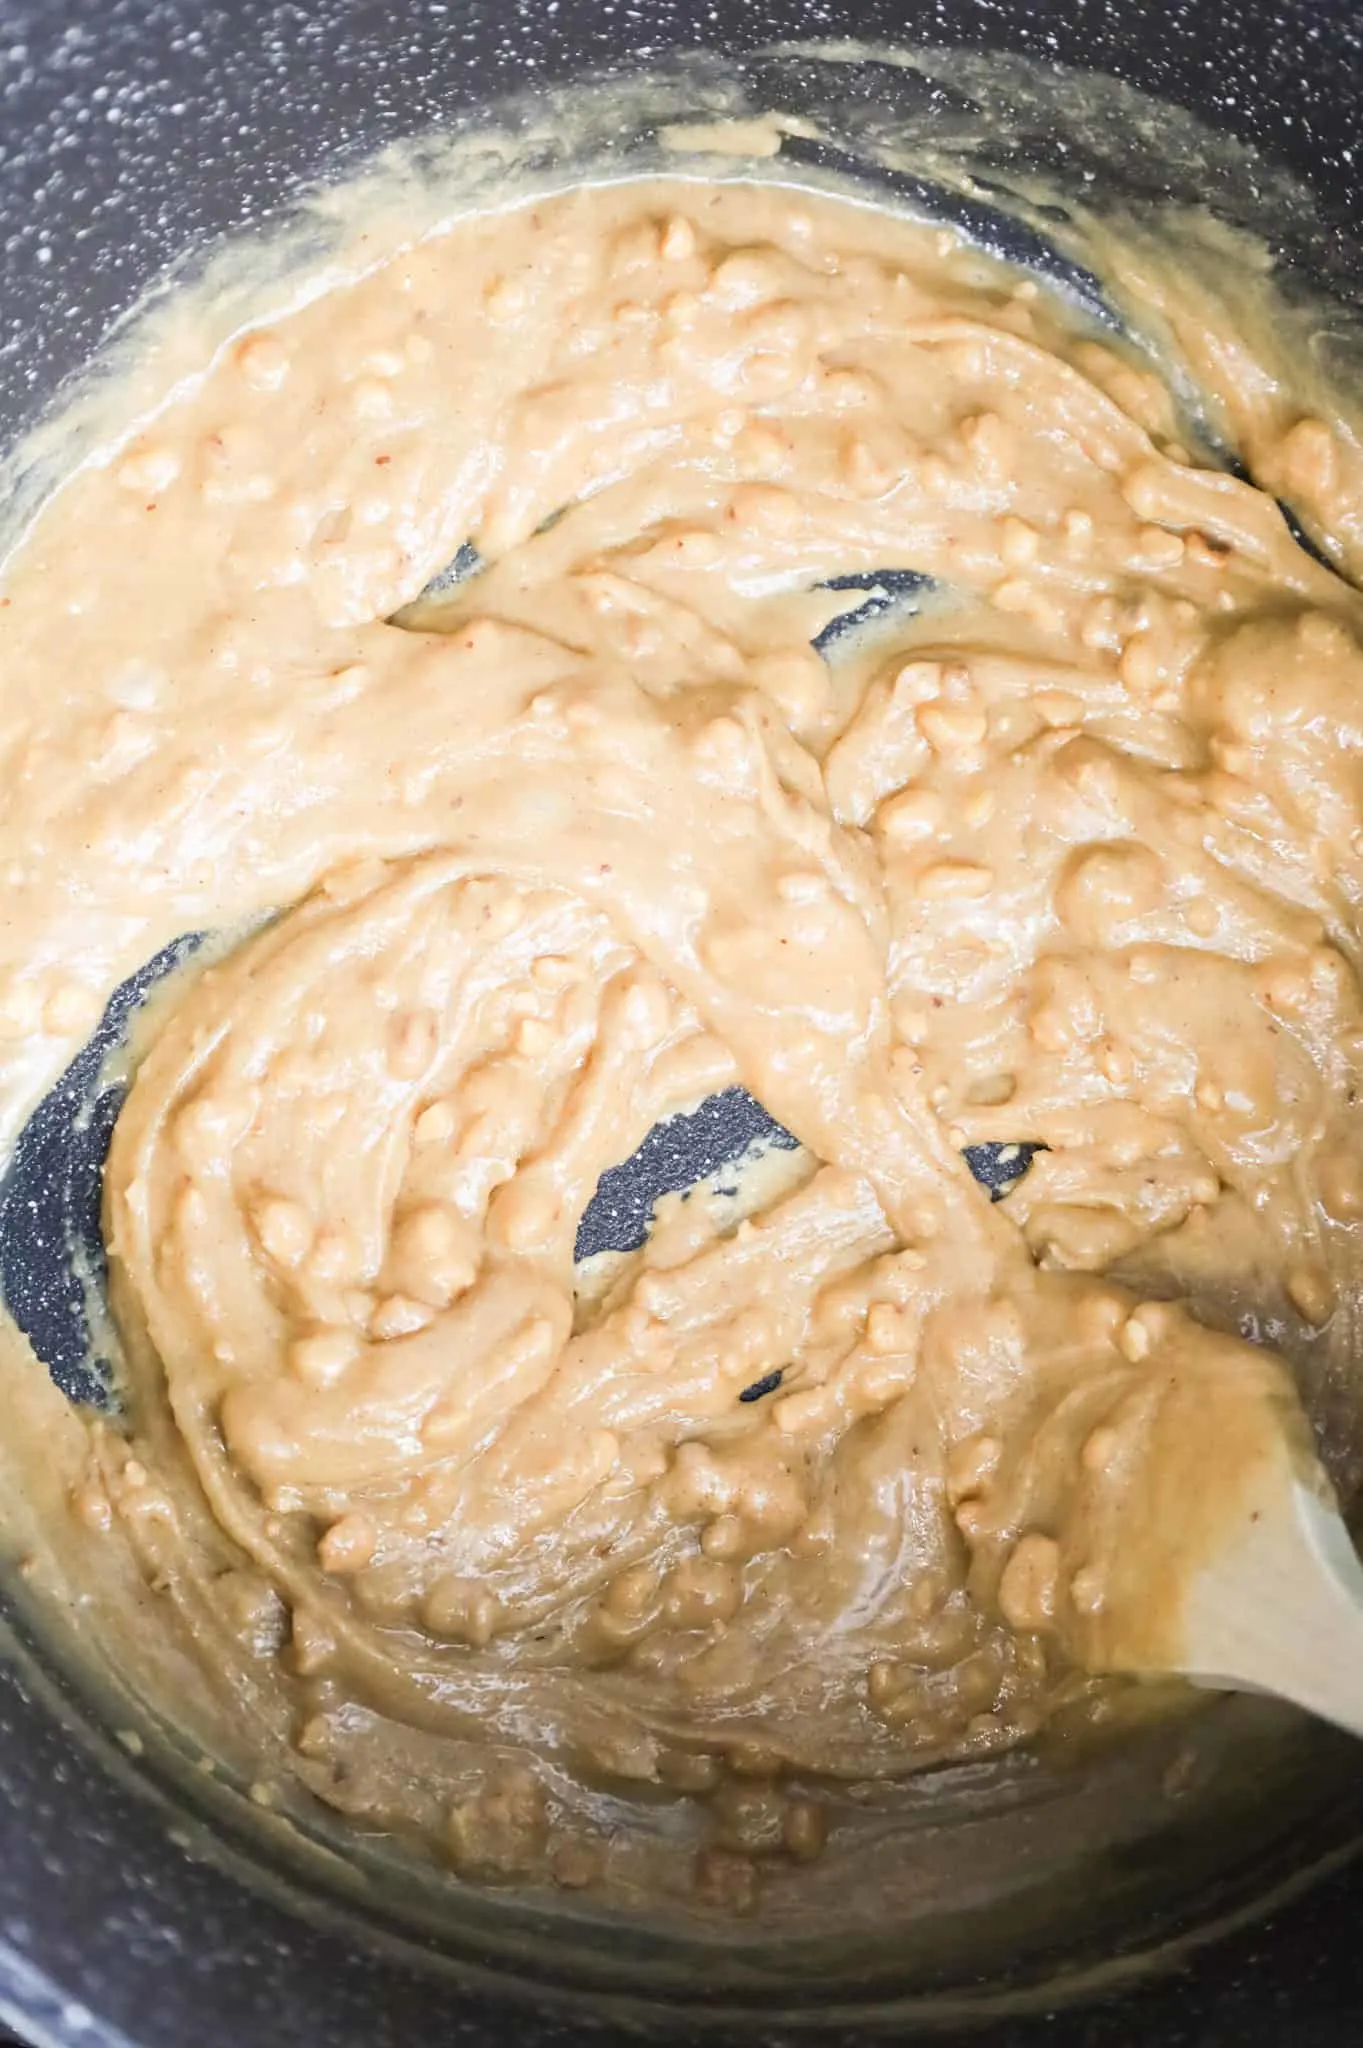 peanut butter, corn syrup and sugar being stirred together in a pot